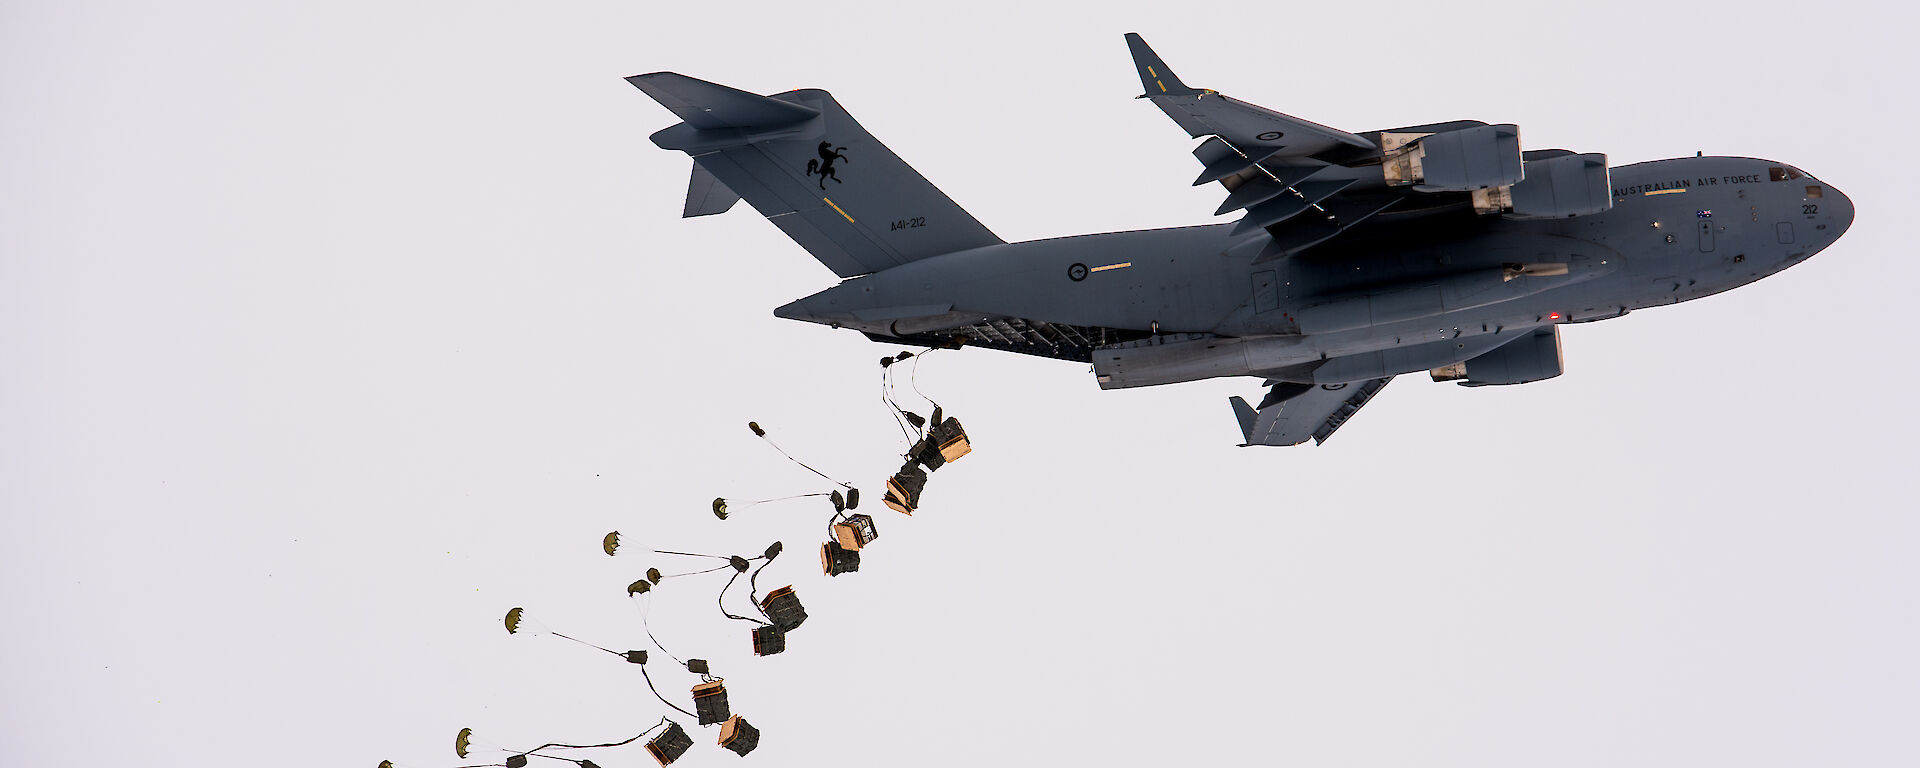 Pallets of supplies attached to parachutes drop from the tail end of a C-17A aircraft